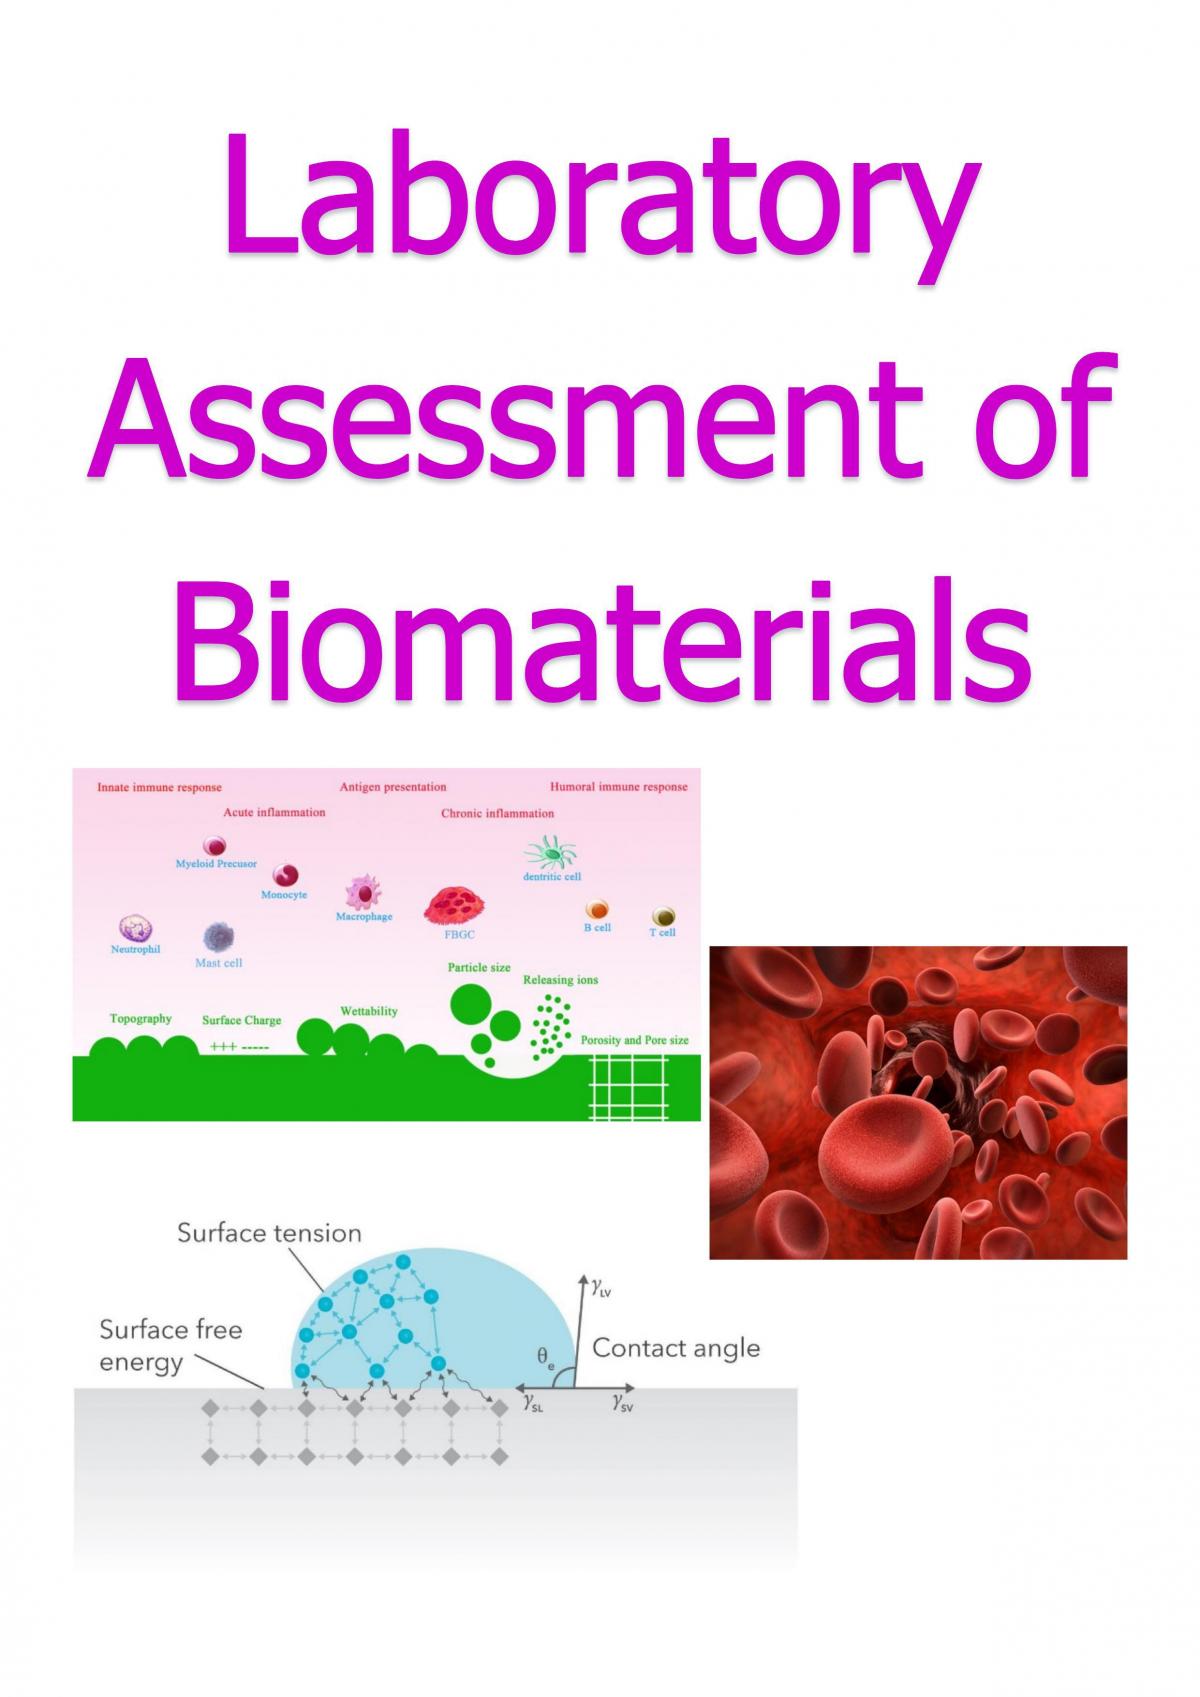 Laboratory Assessment of Biomaterials Module Notes - Page 1